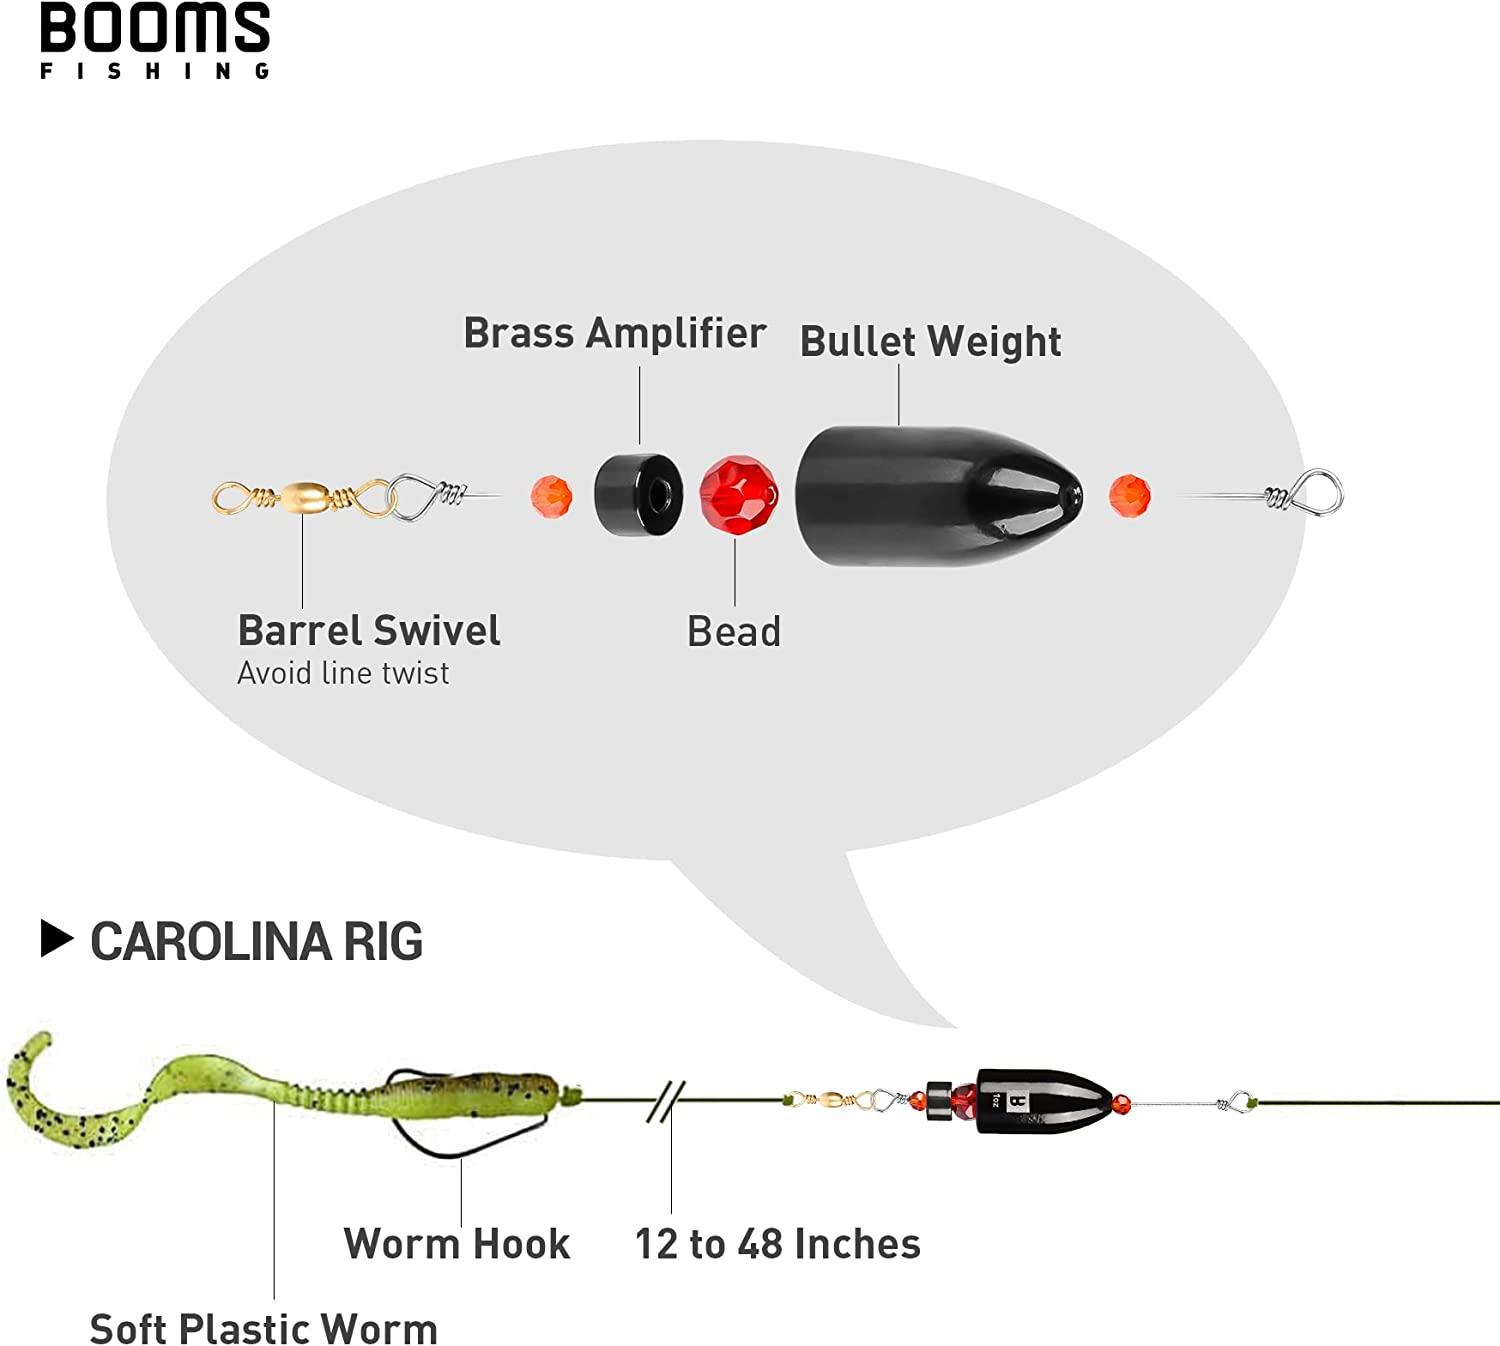 Booms Fishing CRR Carolina Ready Rigs for Bass Fishing Saltwater